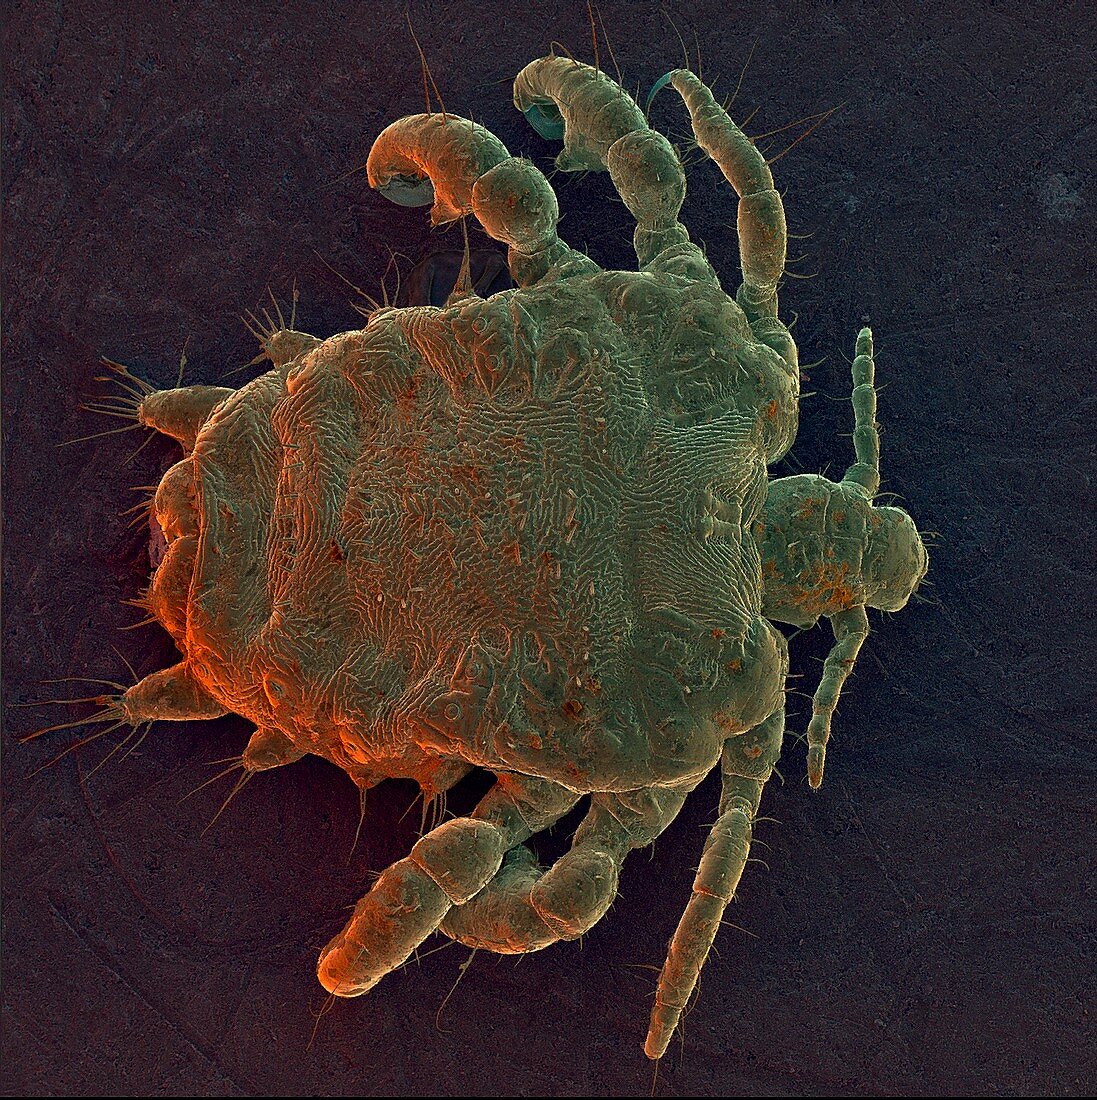 Coloured SEM of a human crab louse,Phthirus pubis